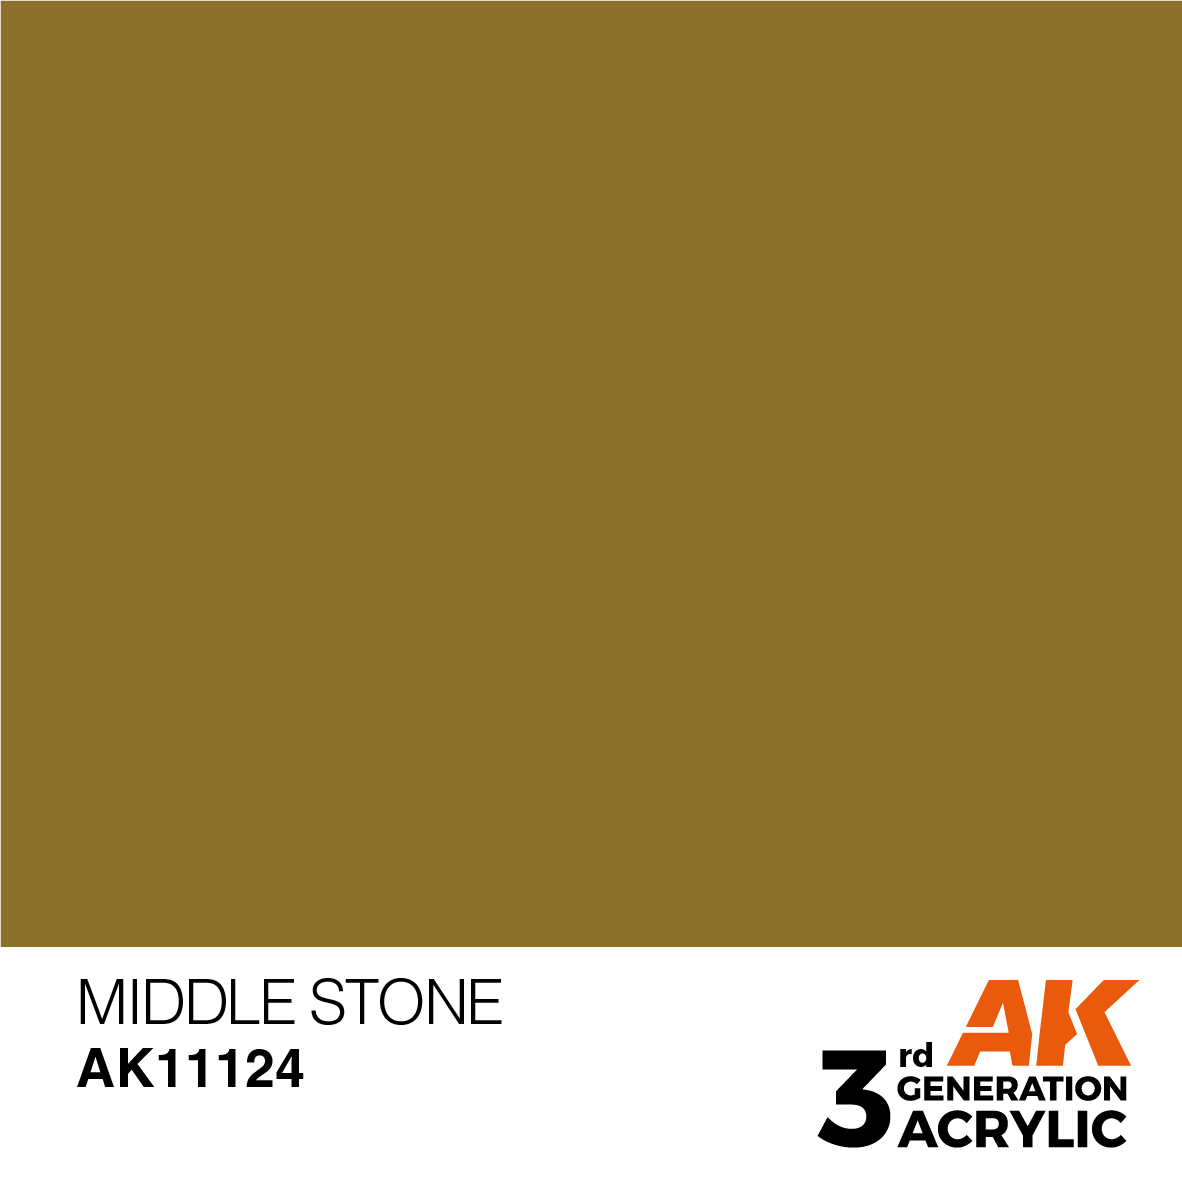 MIDDLE STONE – STANDARD